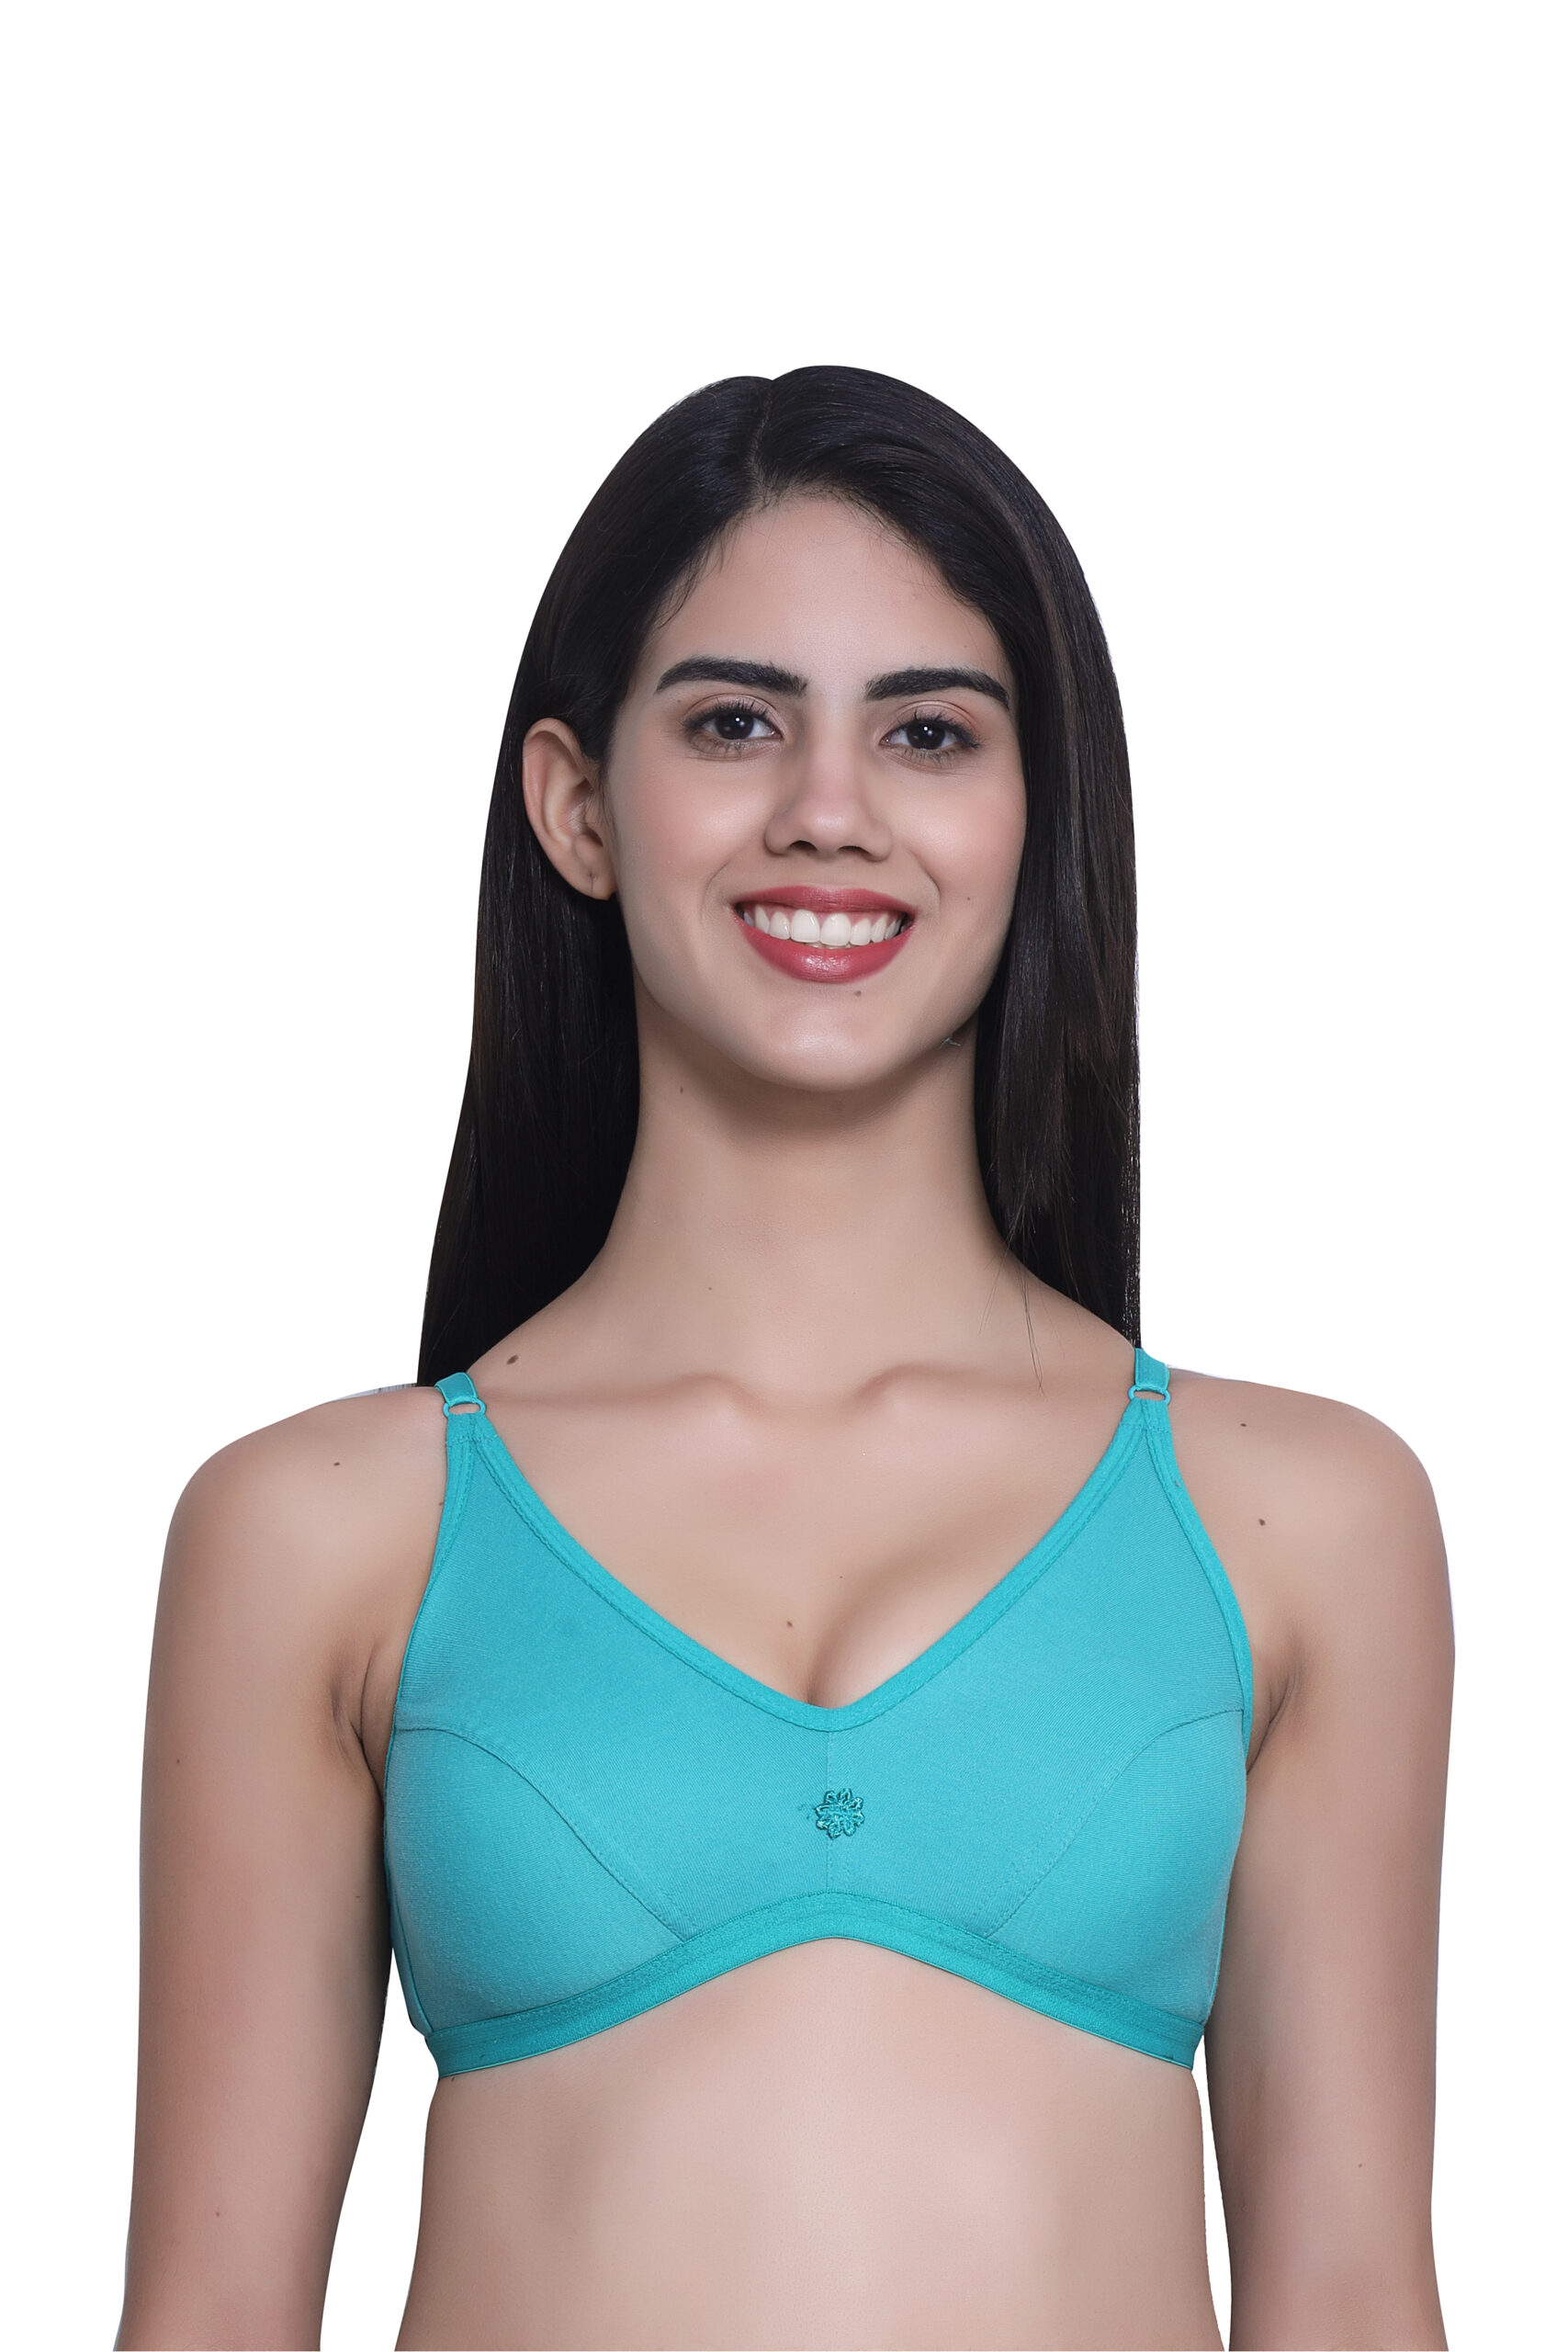 Get Premium Quality Non-Padded Bra Only ₹199-/ Shipping Free